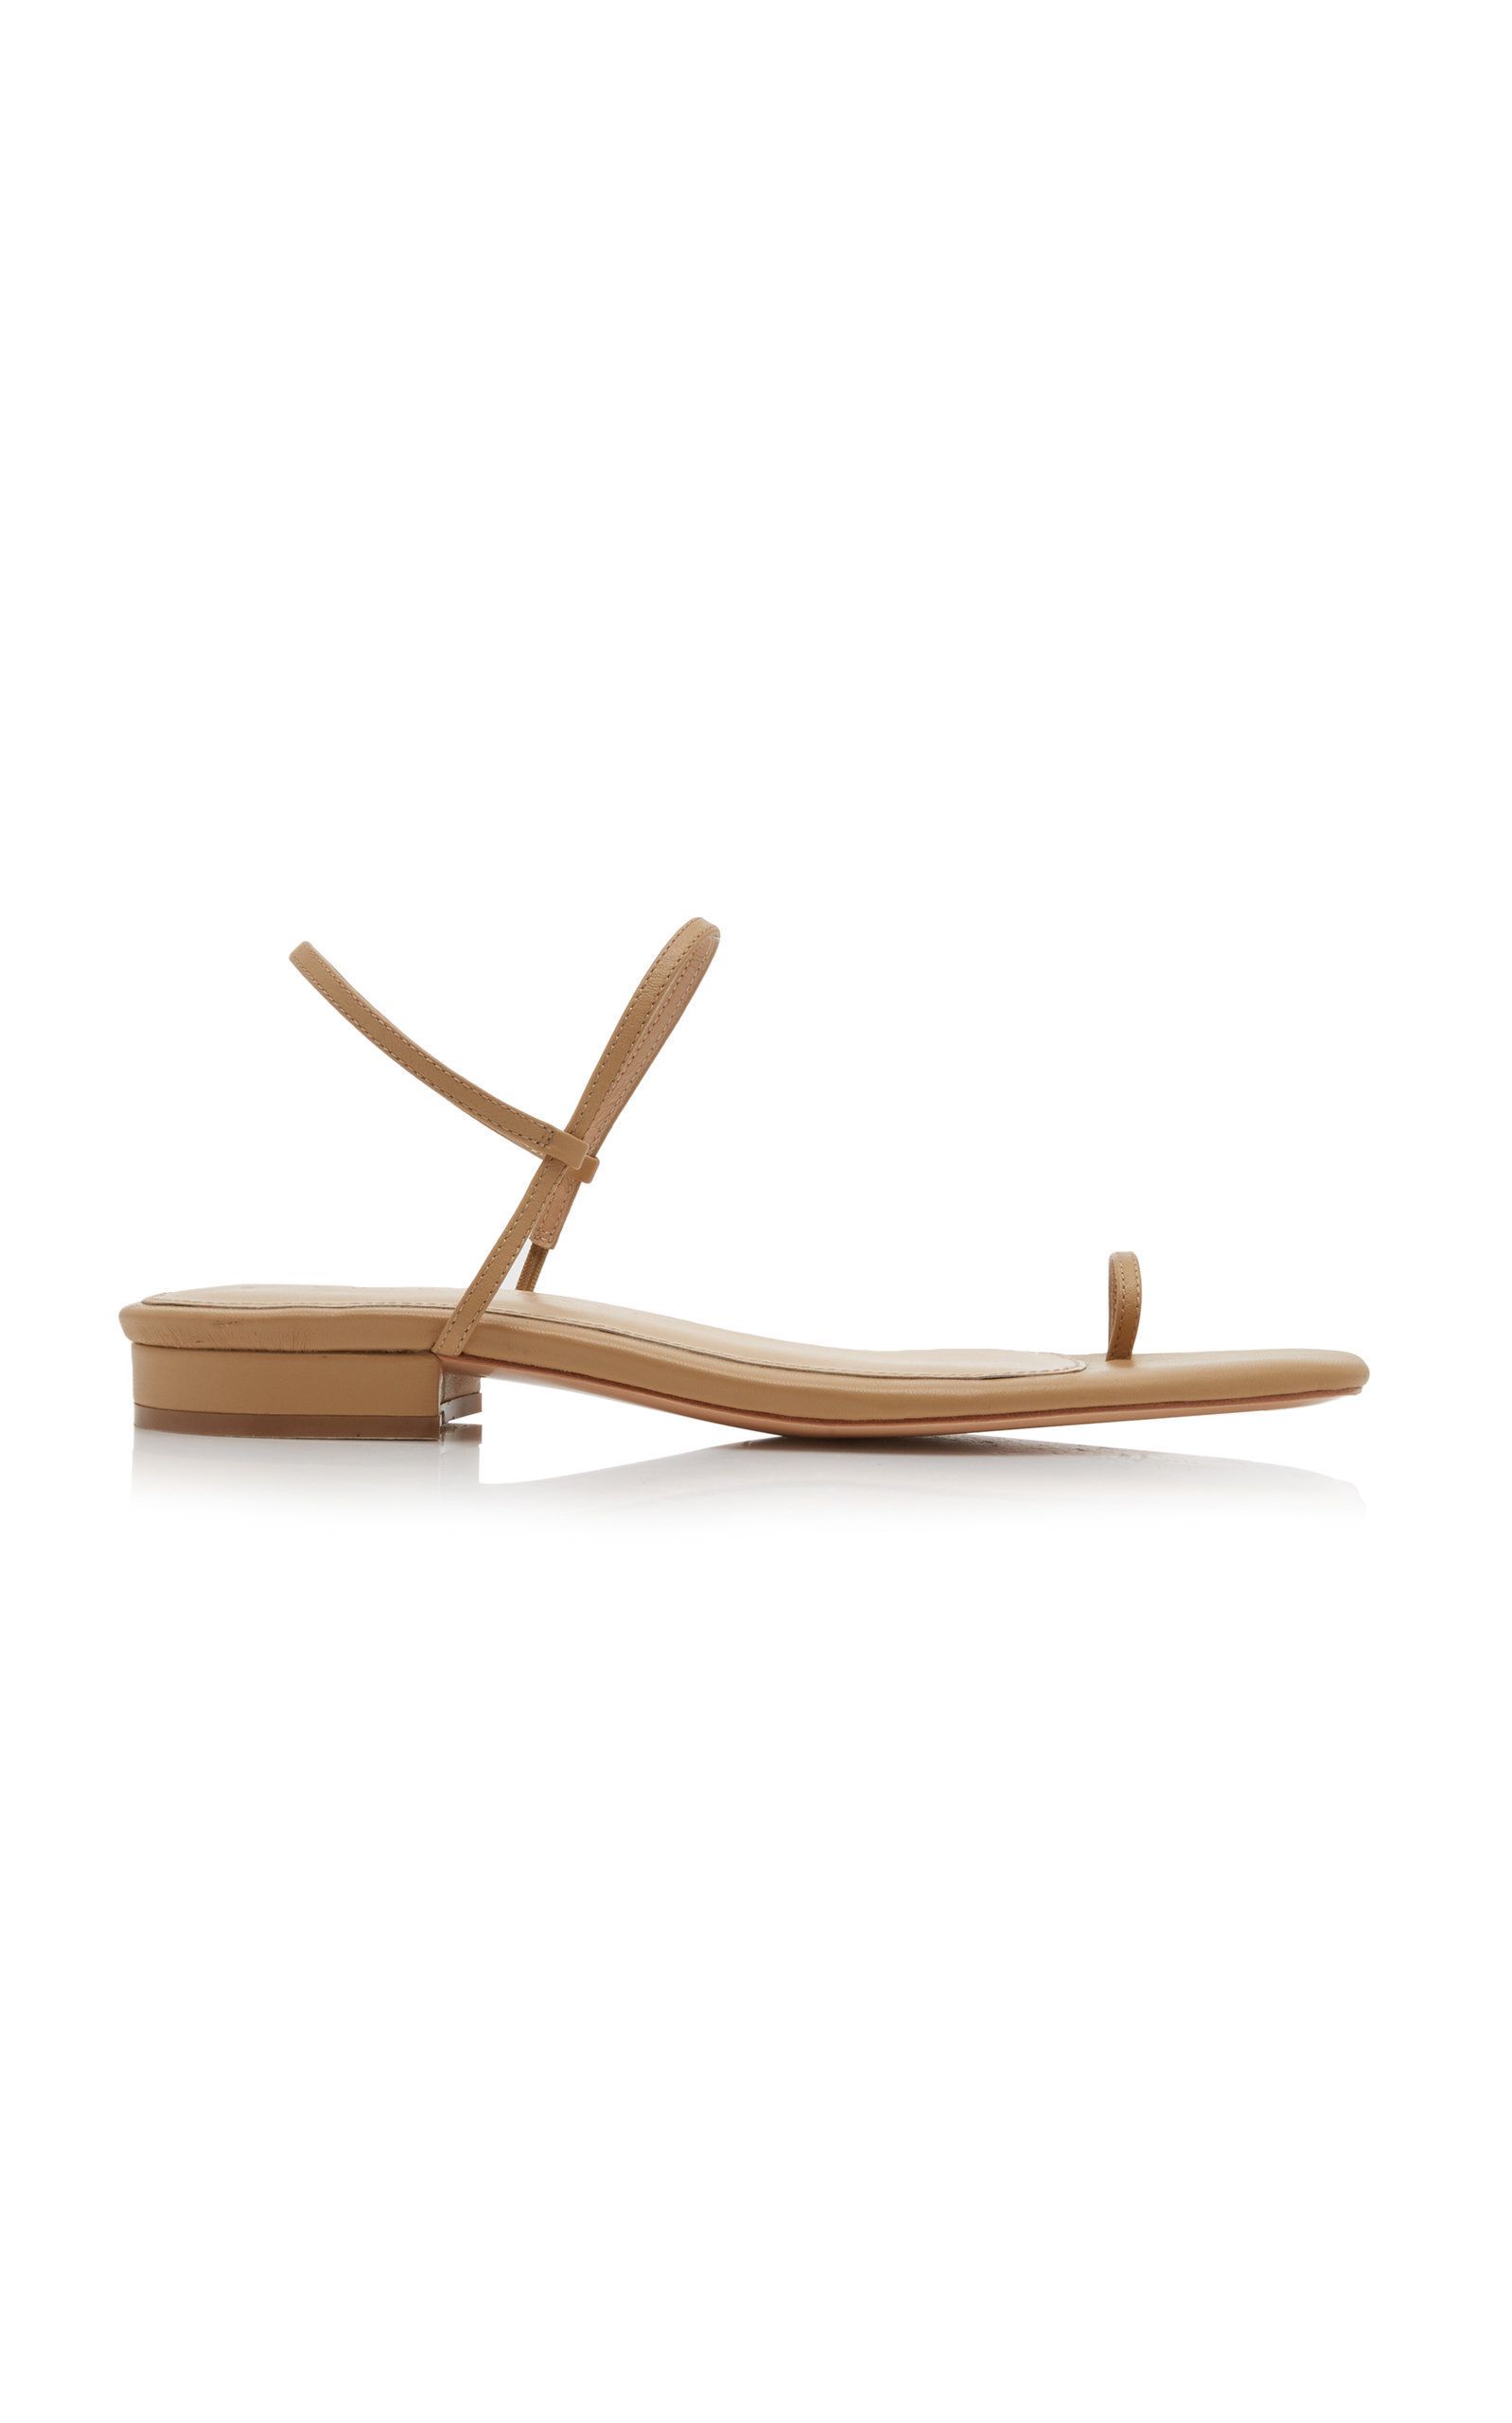 Everyone is Talking About This Barely-There Sandal Brand